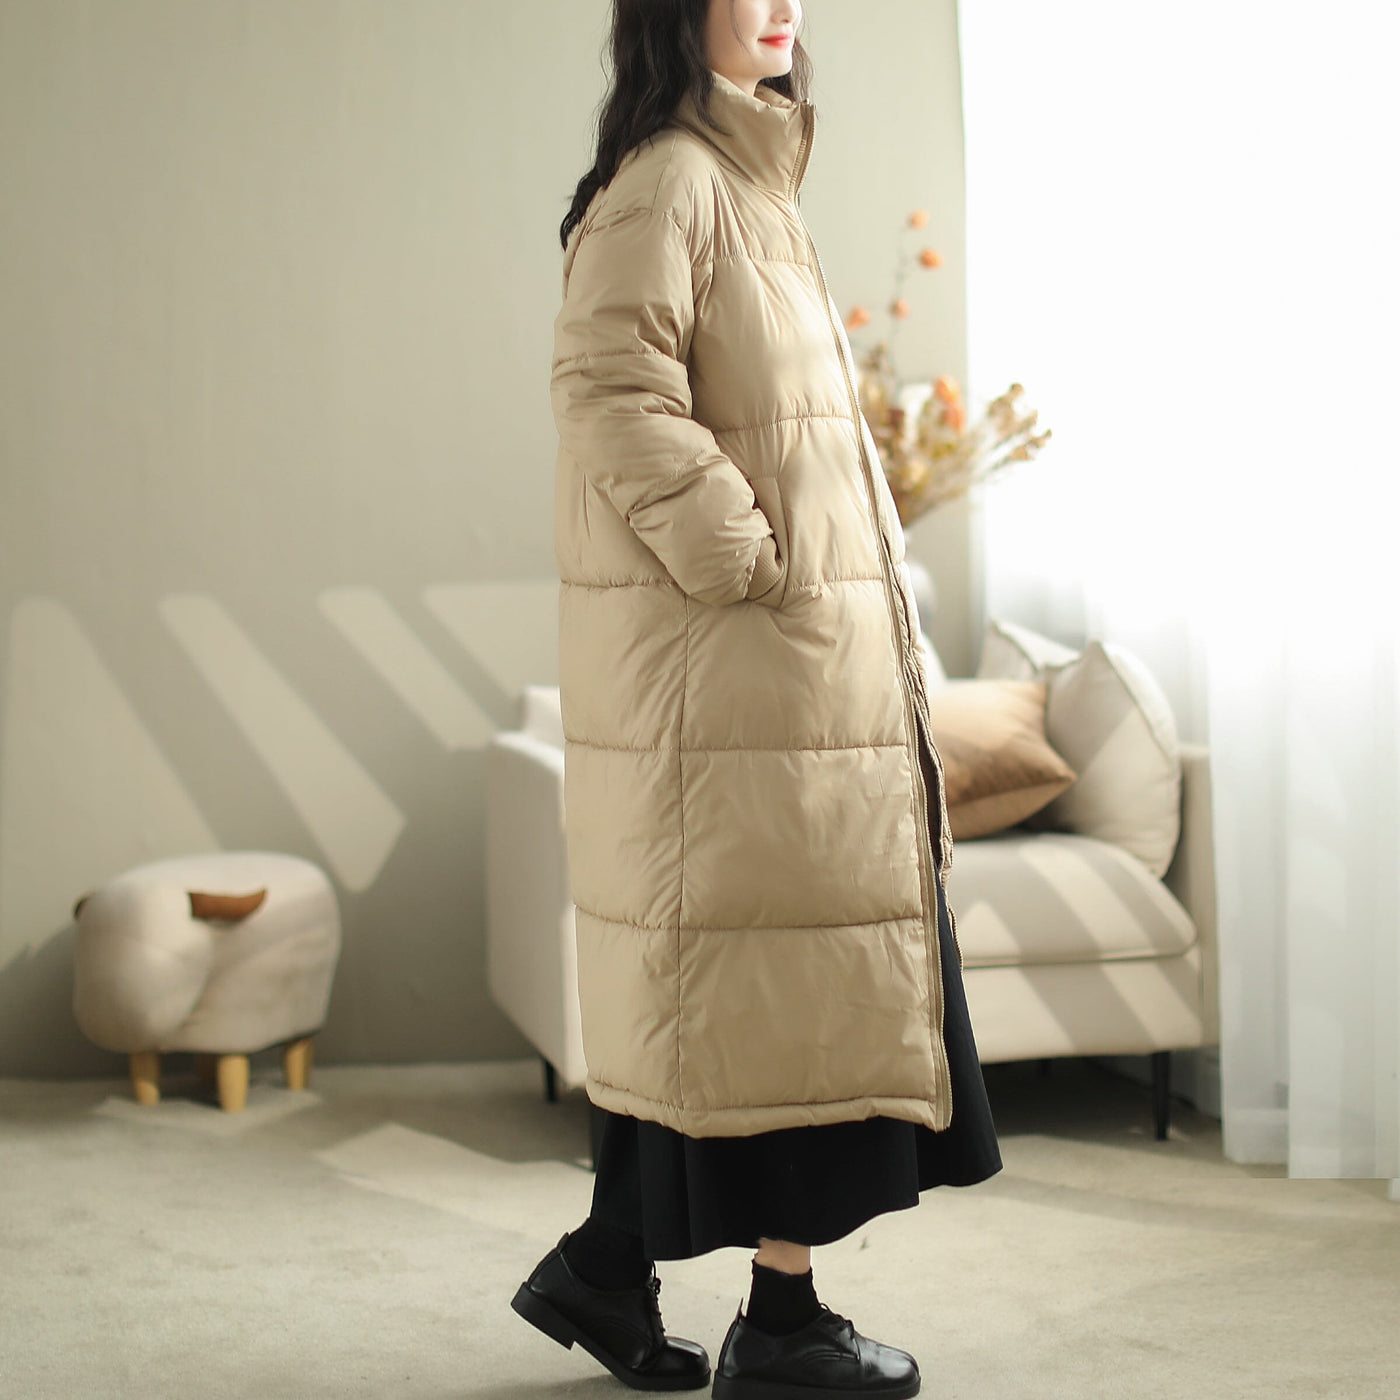 Winter Minimalist Casual Loose Quilted Overcoat